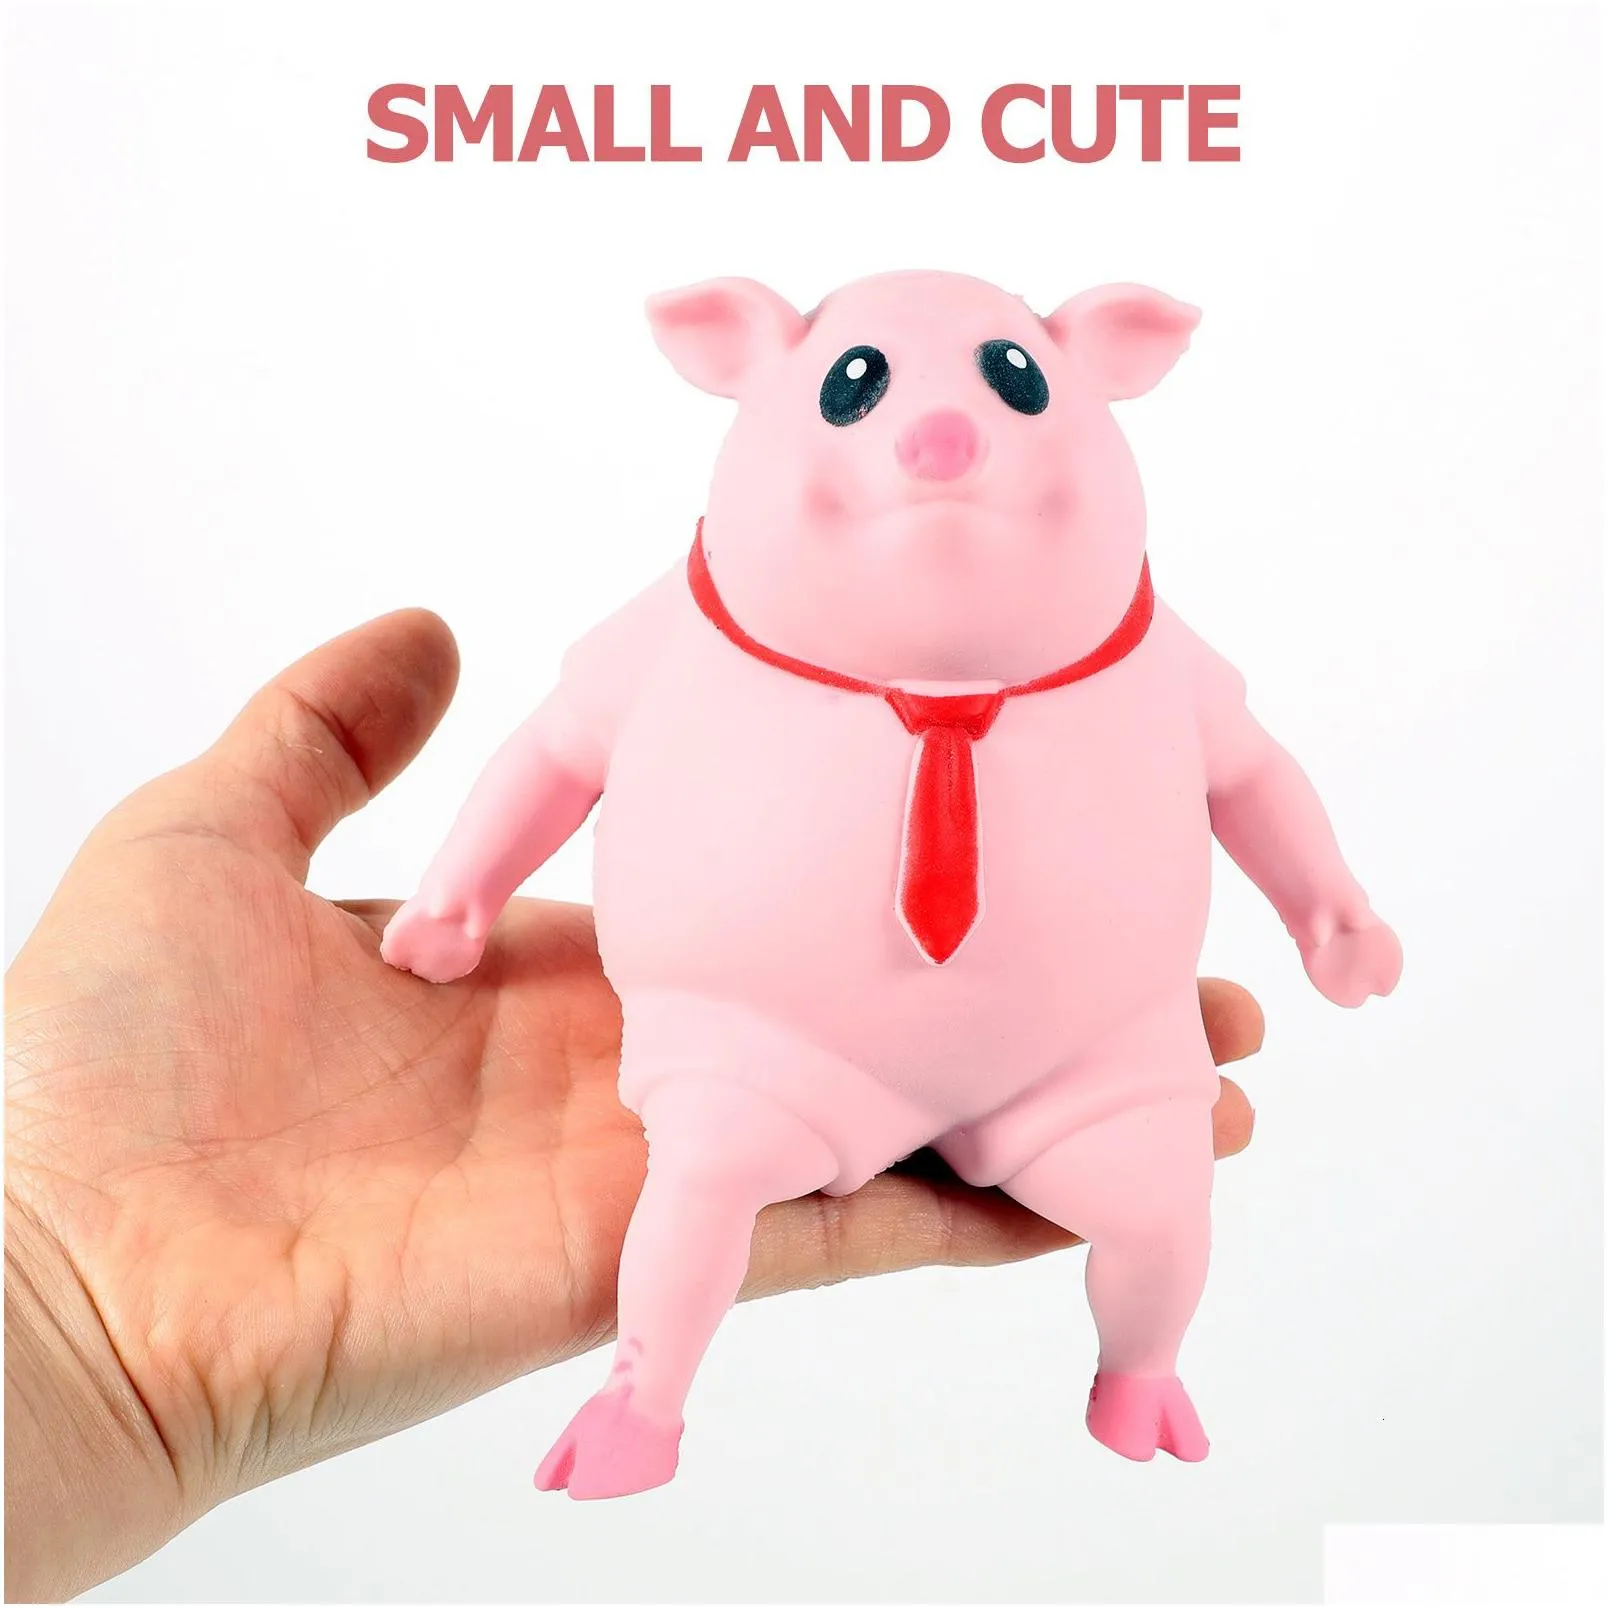 decompression toy squeeze pink pigs antistress cute animals lovely piggy doll stress relief children gifts 230612